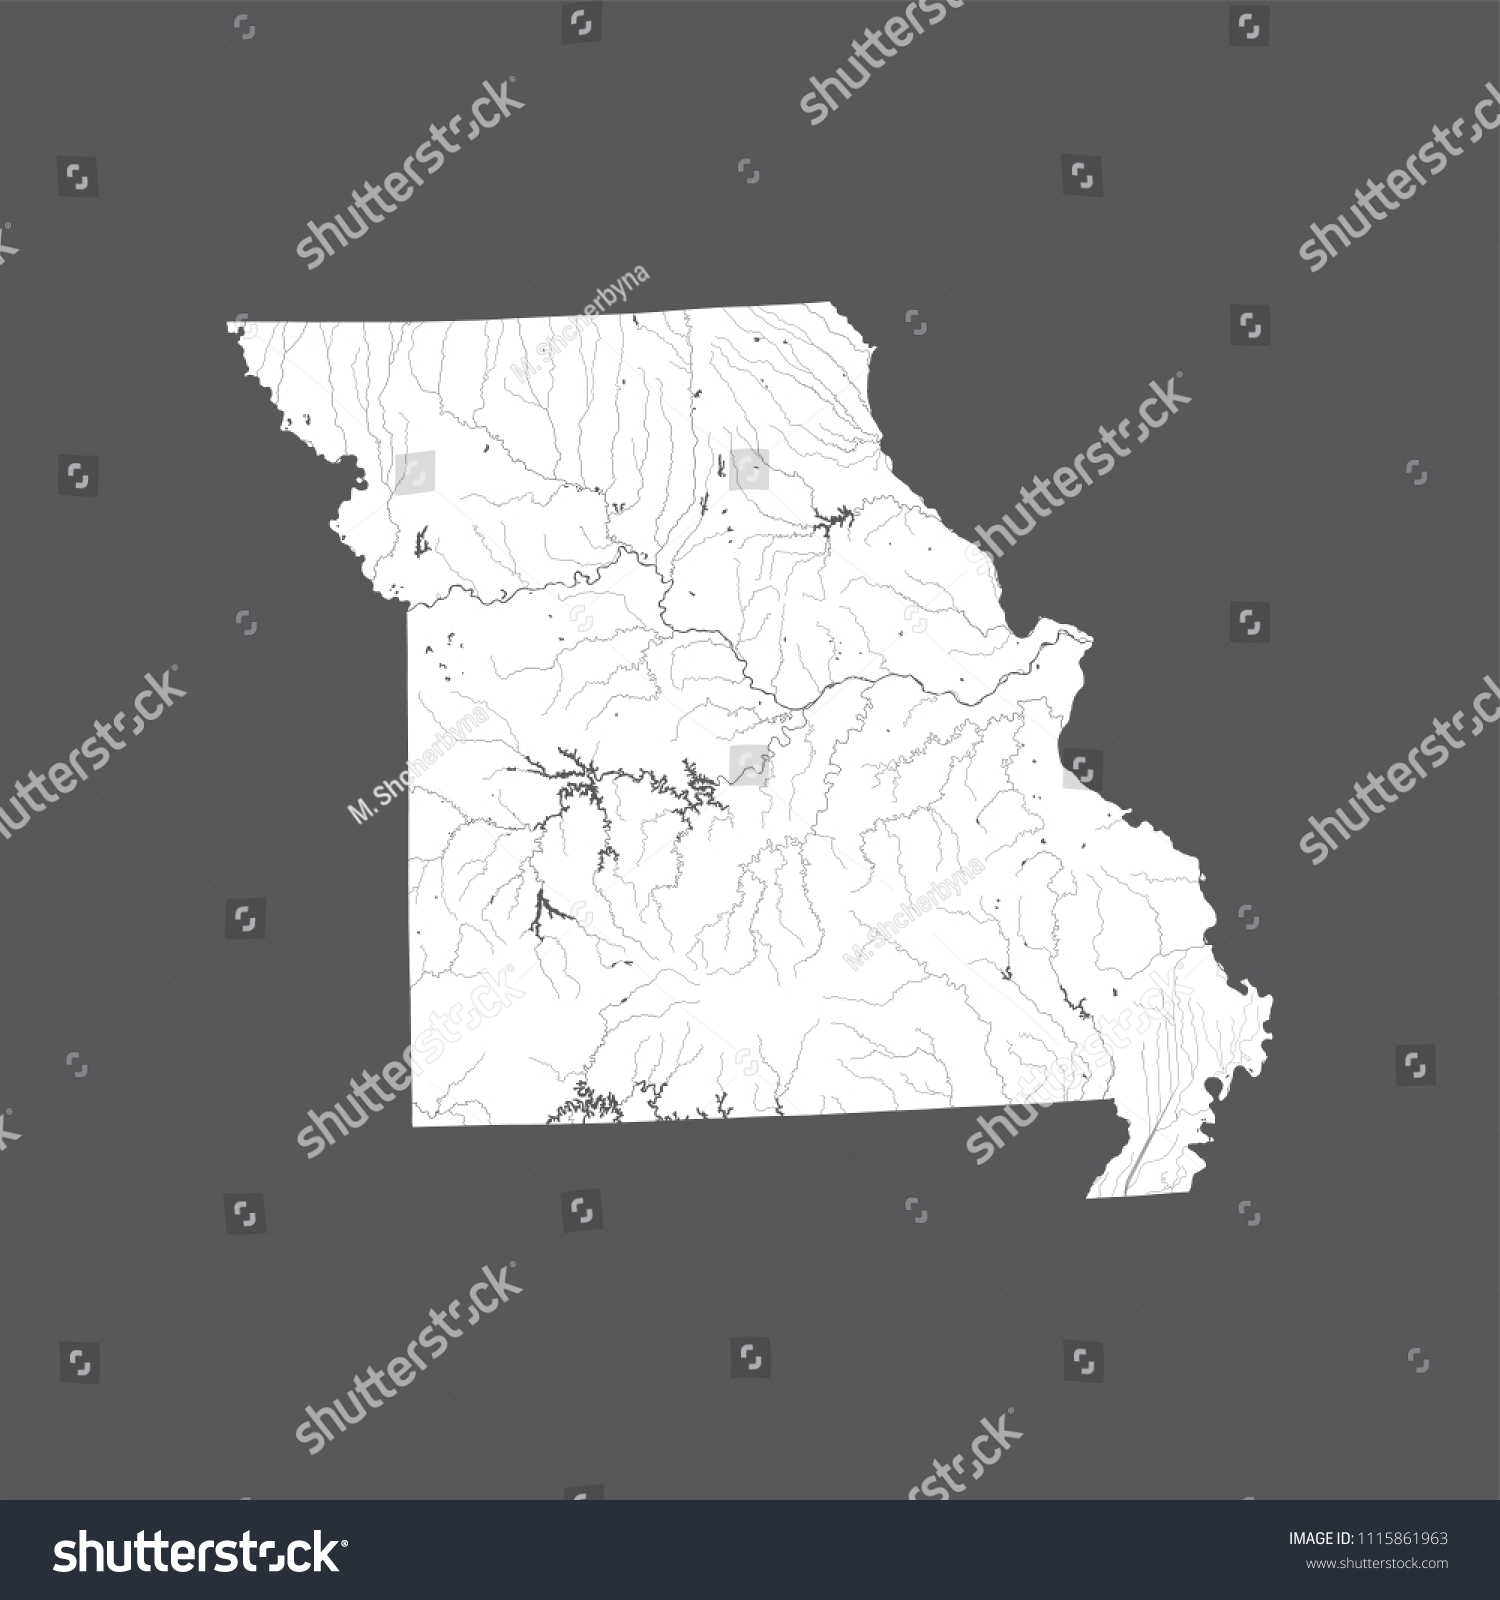 SVG of U.S. states - map of Missouri. Hand made. Rivers and lakes are shown. Please look my other images of cartographic series - they are all very detailed and carefully drawn by hand WITH RIVERS AND LAKES. svg